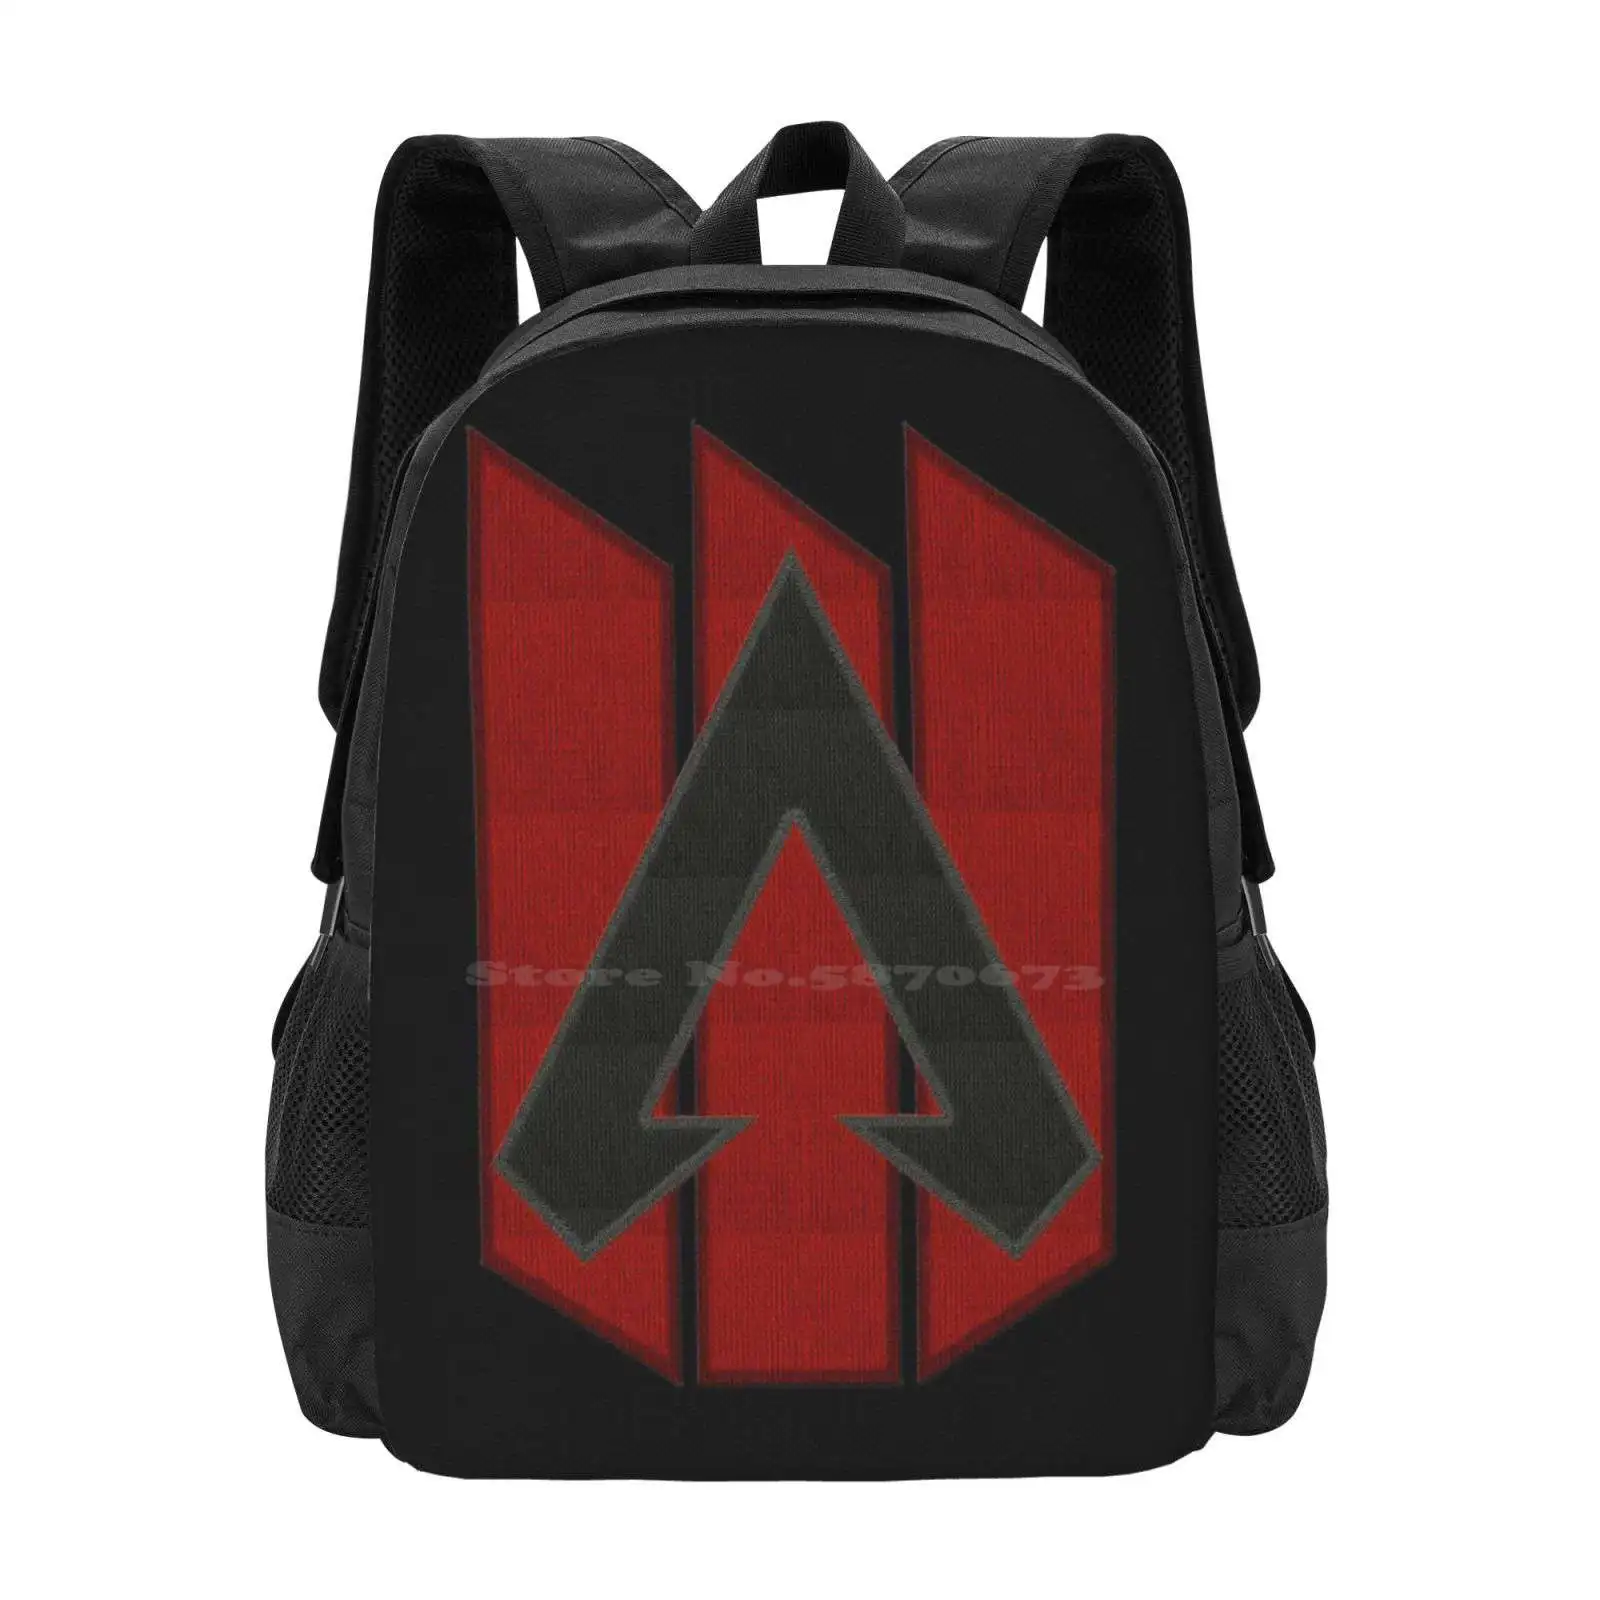 

Apex Legends Logo Patch | Apex Legends Embroidered Patch Style Fashion Pattern Design Travel Laptop School Backpack Bag Apex